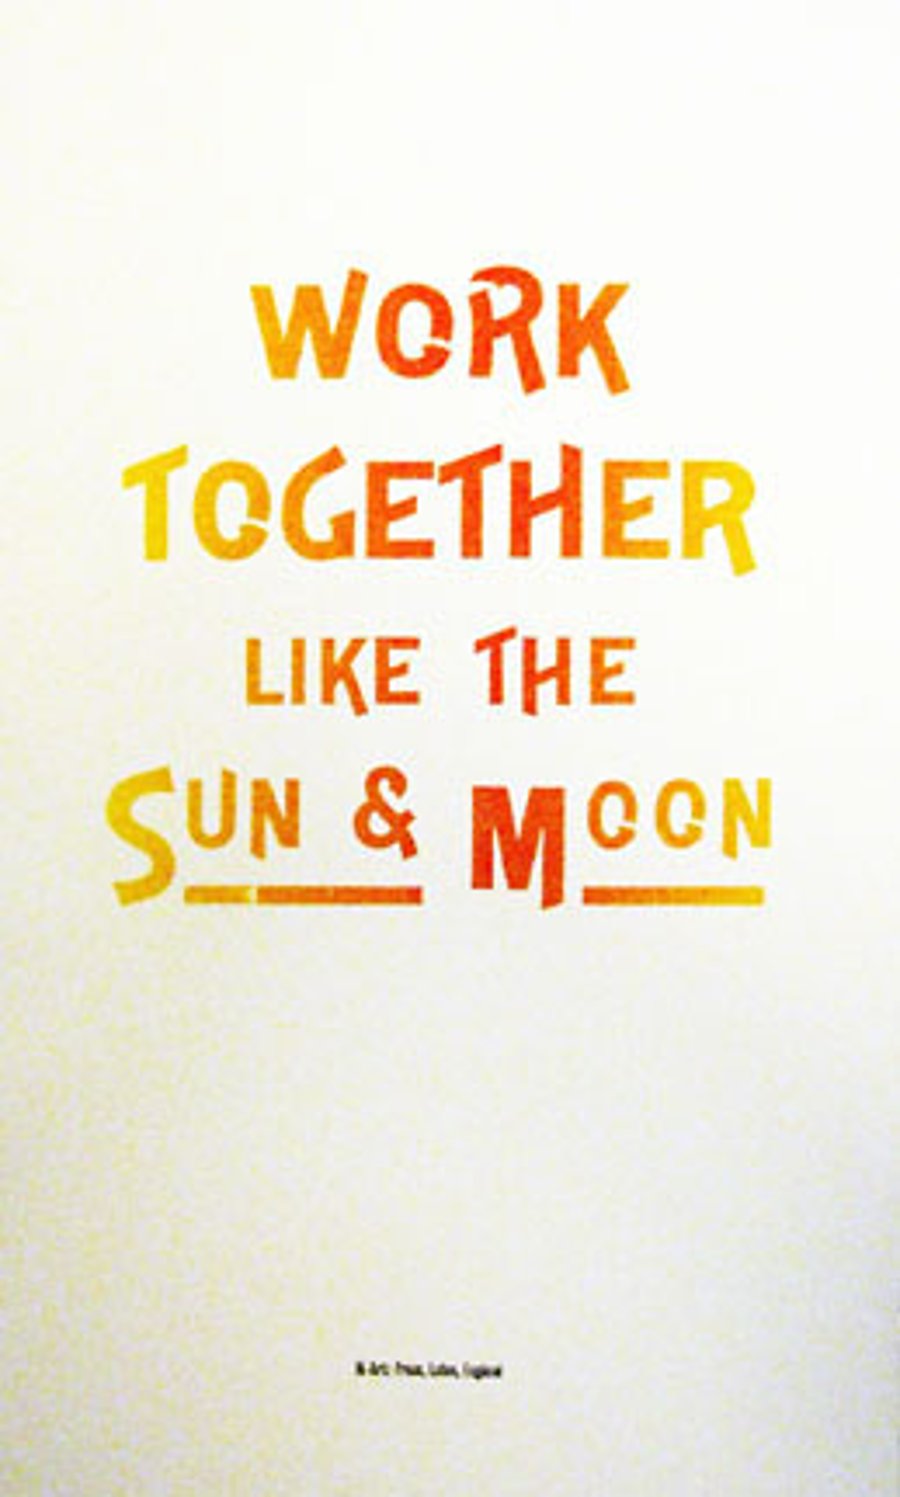 "Work Together Like The Sun & Moon" Letterpress Poster. 